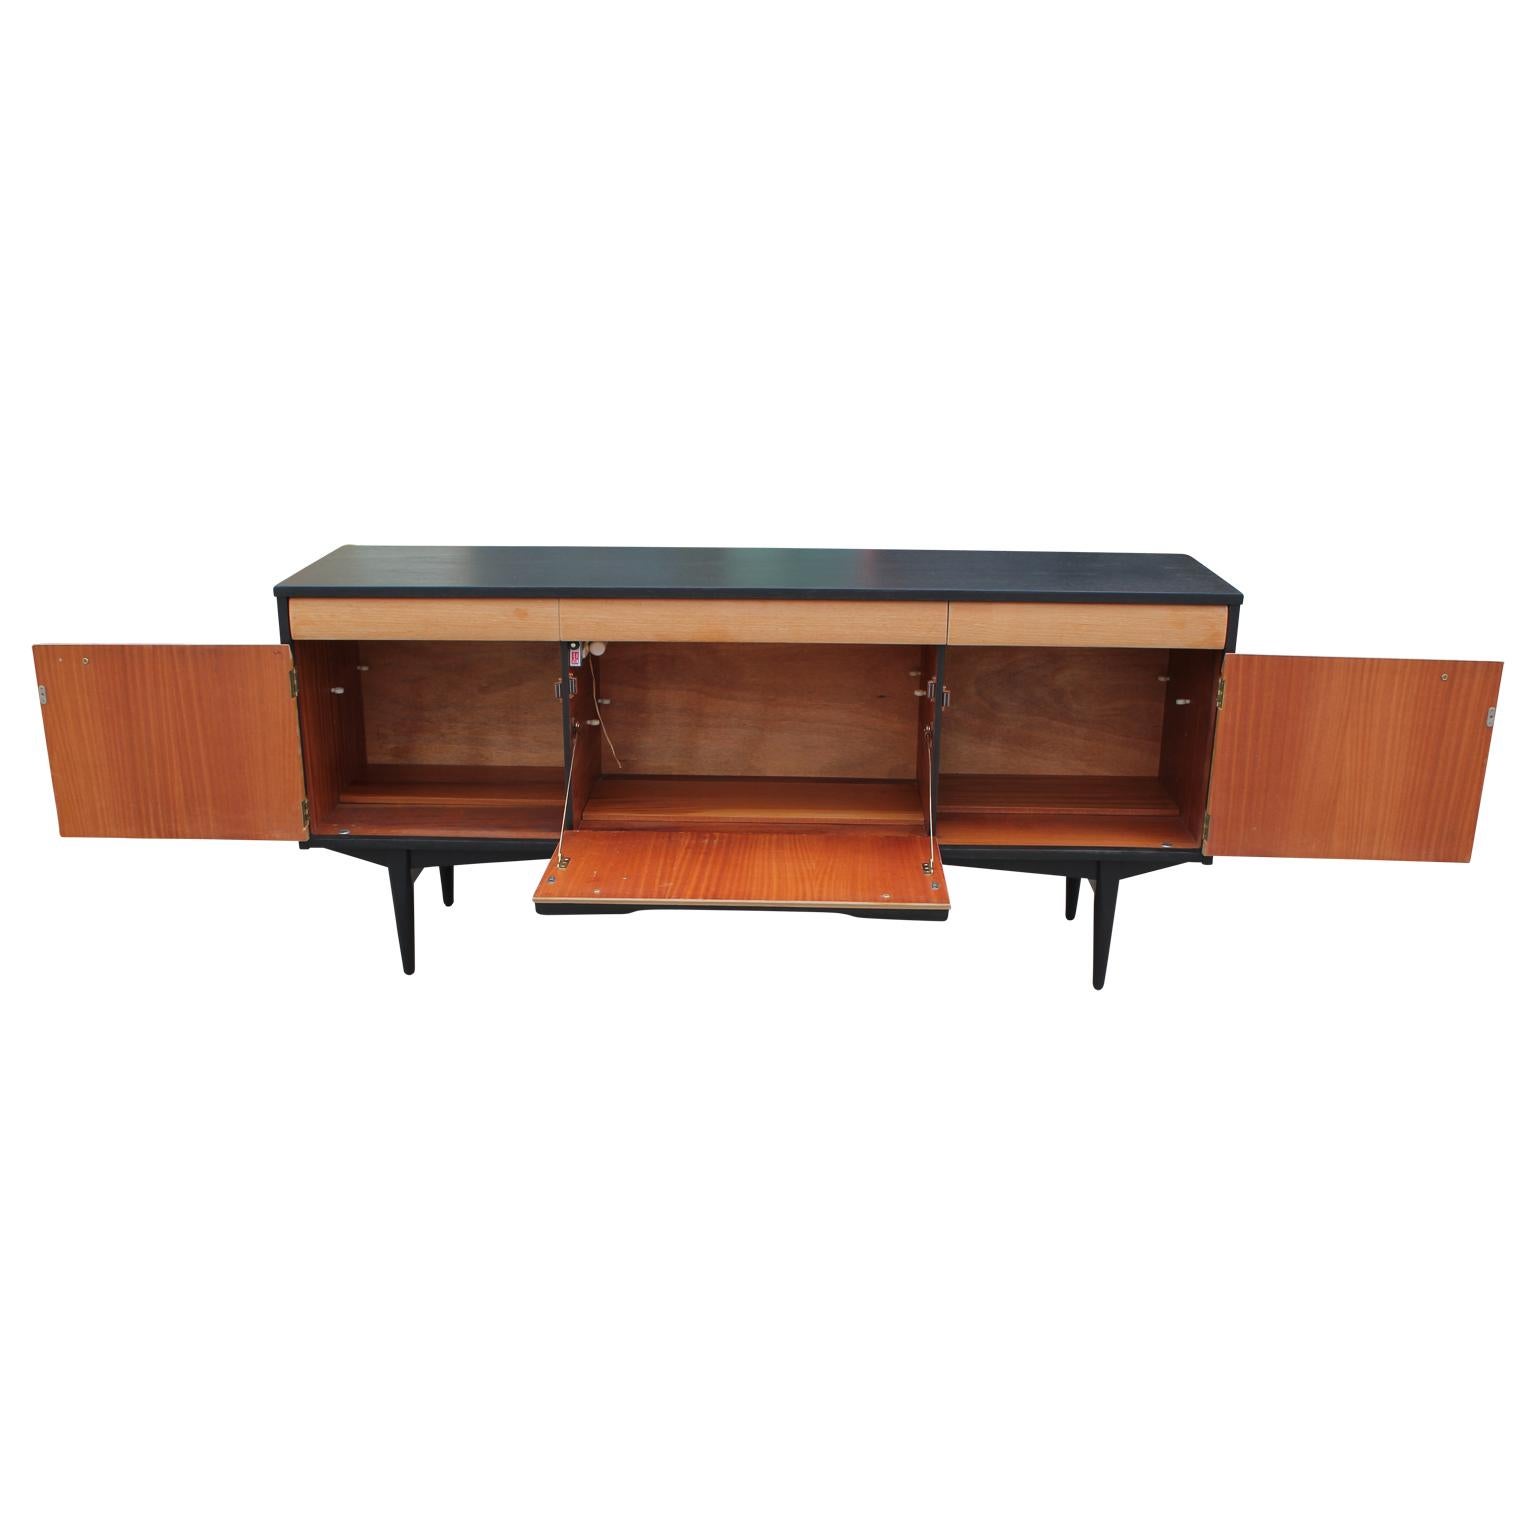 Mid-Century Modern Two-Tone Clean Lined Credenza or Sideboard with Three Drawers 1